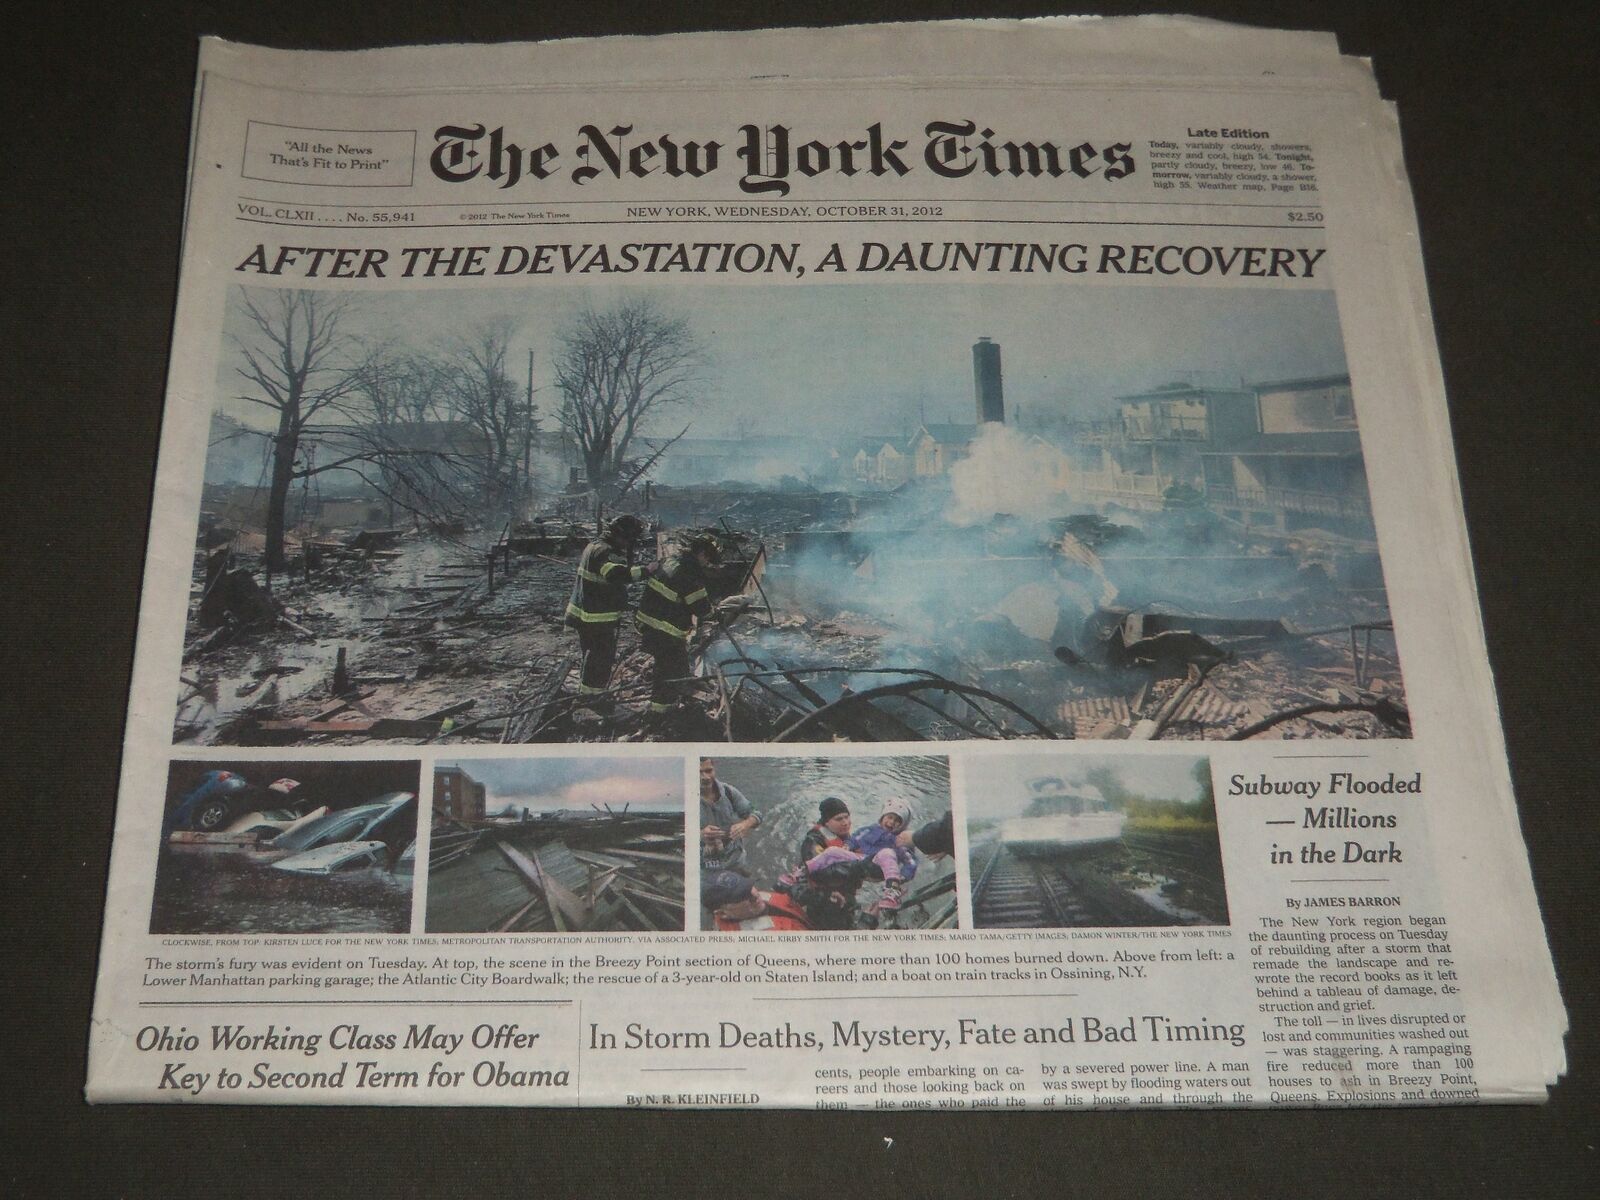 2012 OCTOBER 31 NEW YORK TIMES - AFTER THE DEVASTATION - RECOVERY - NP 2448